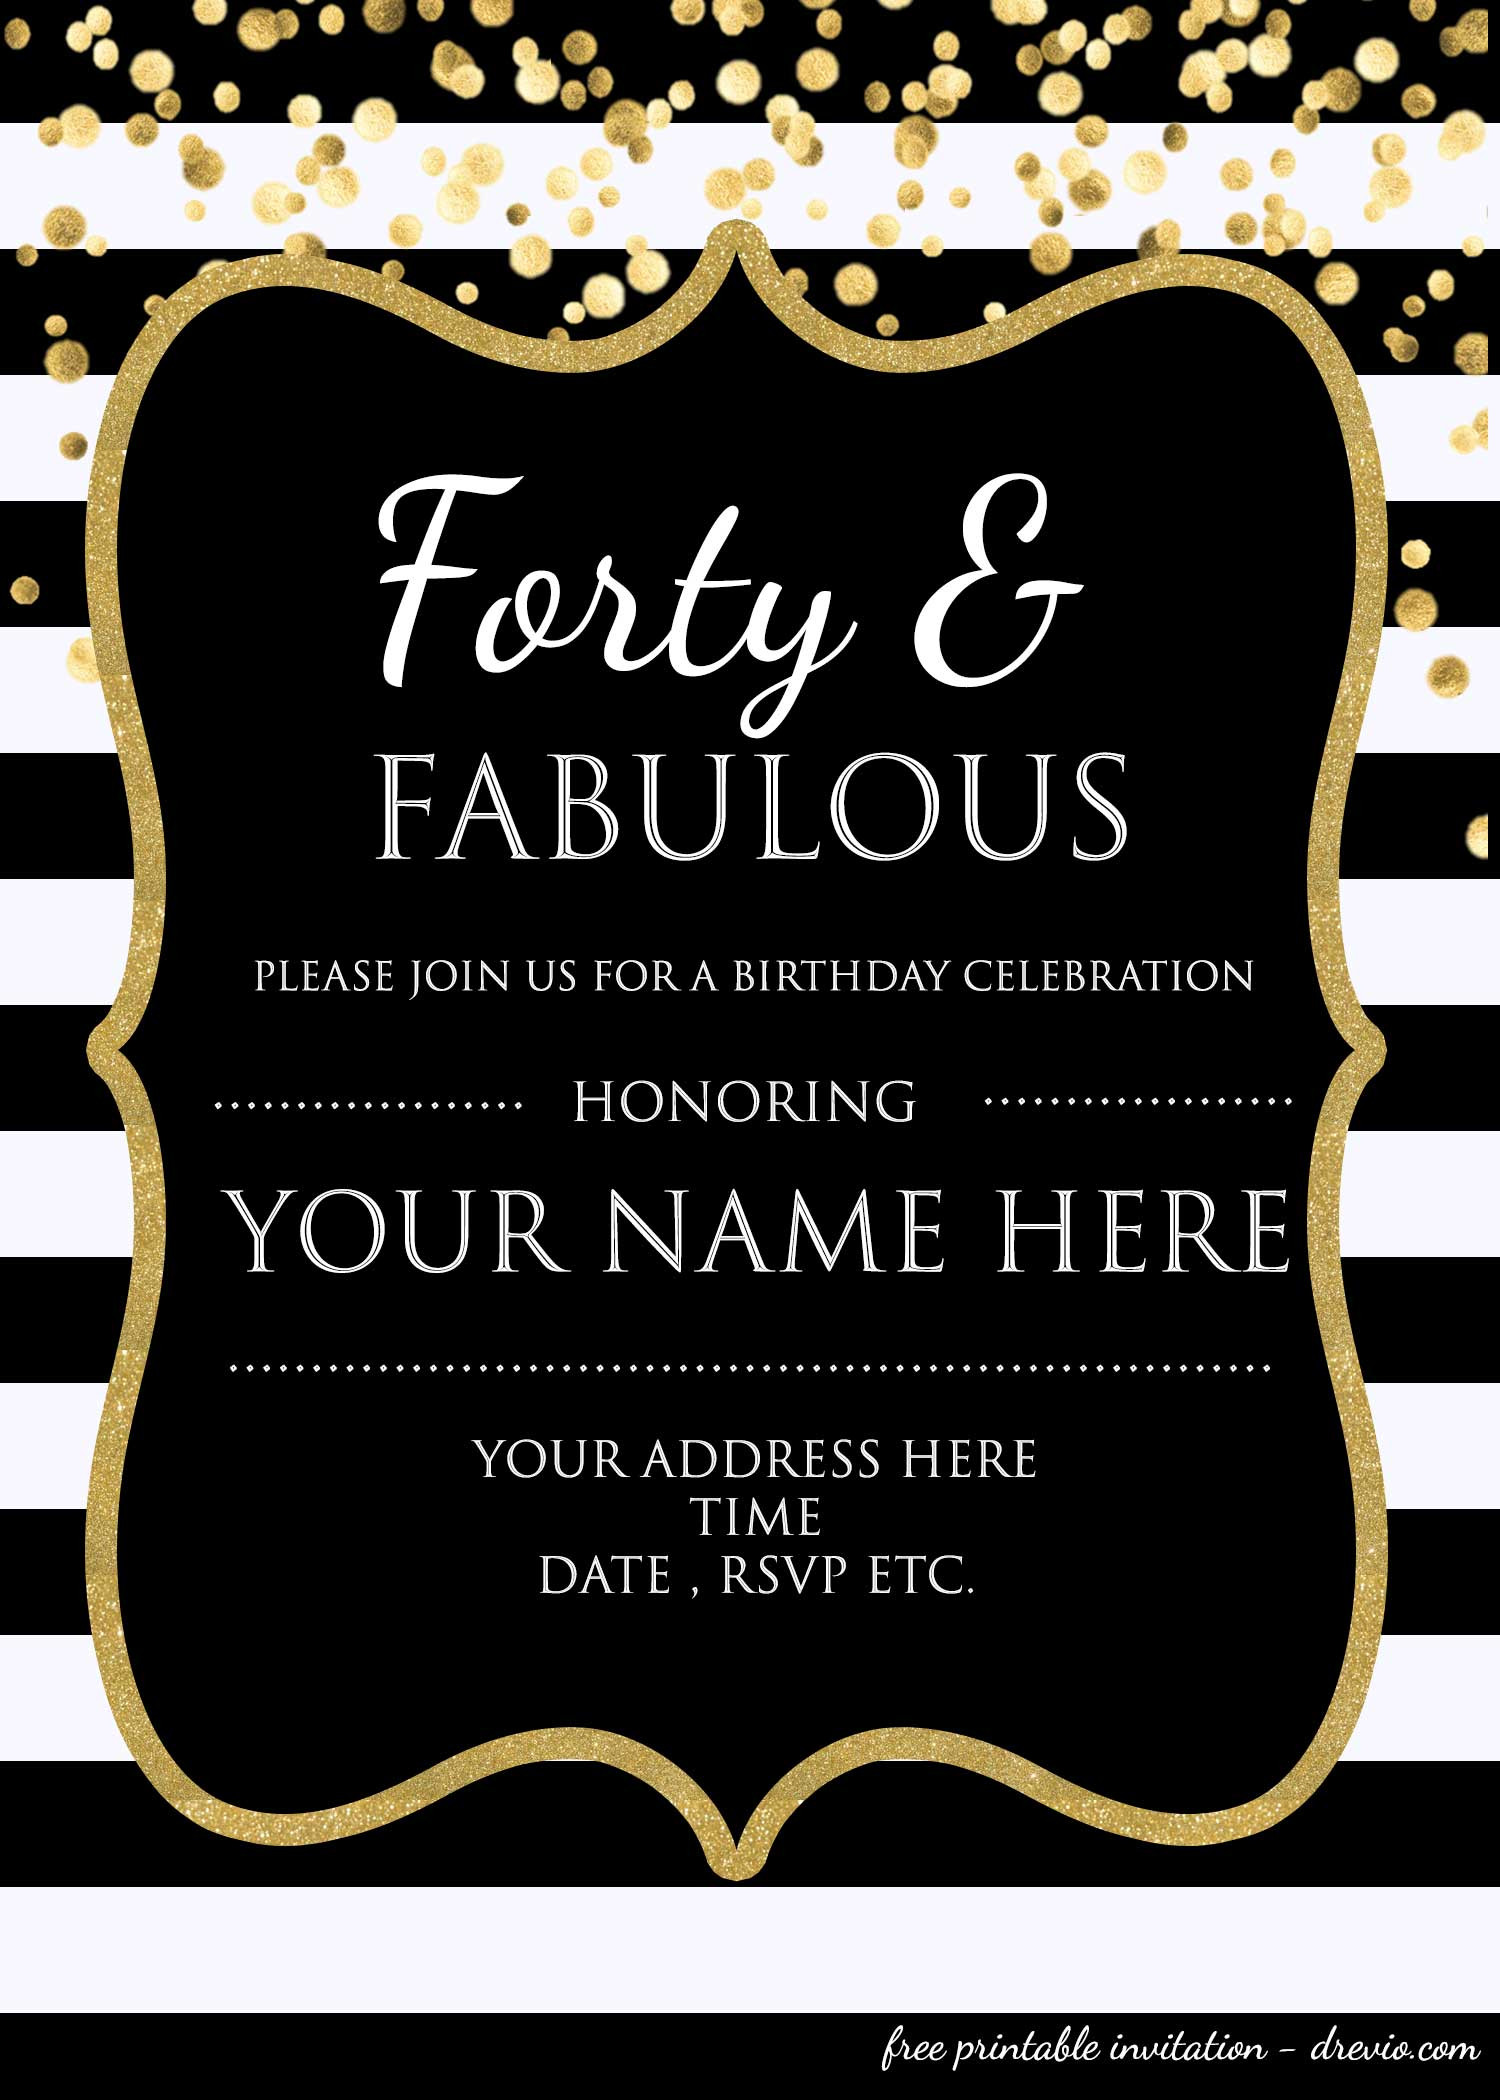 Birthday Party Invitation Template Word
 40th Birthday Invitation Template – FREE – FREE Printable